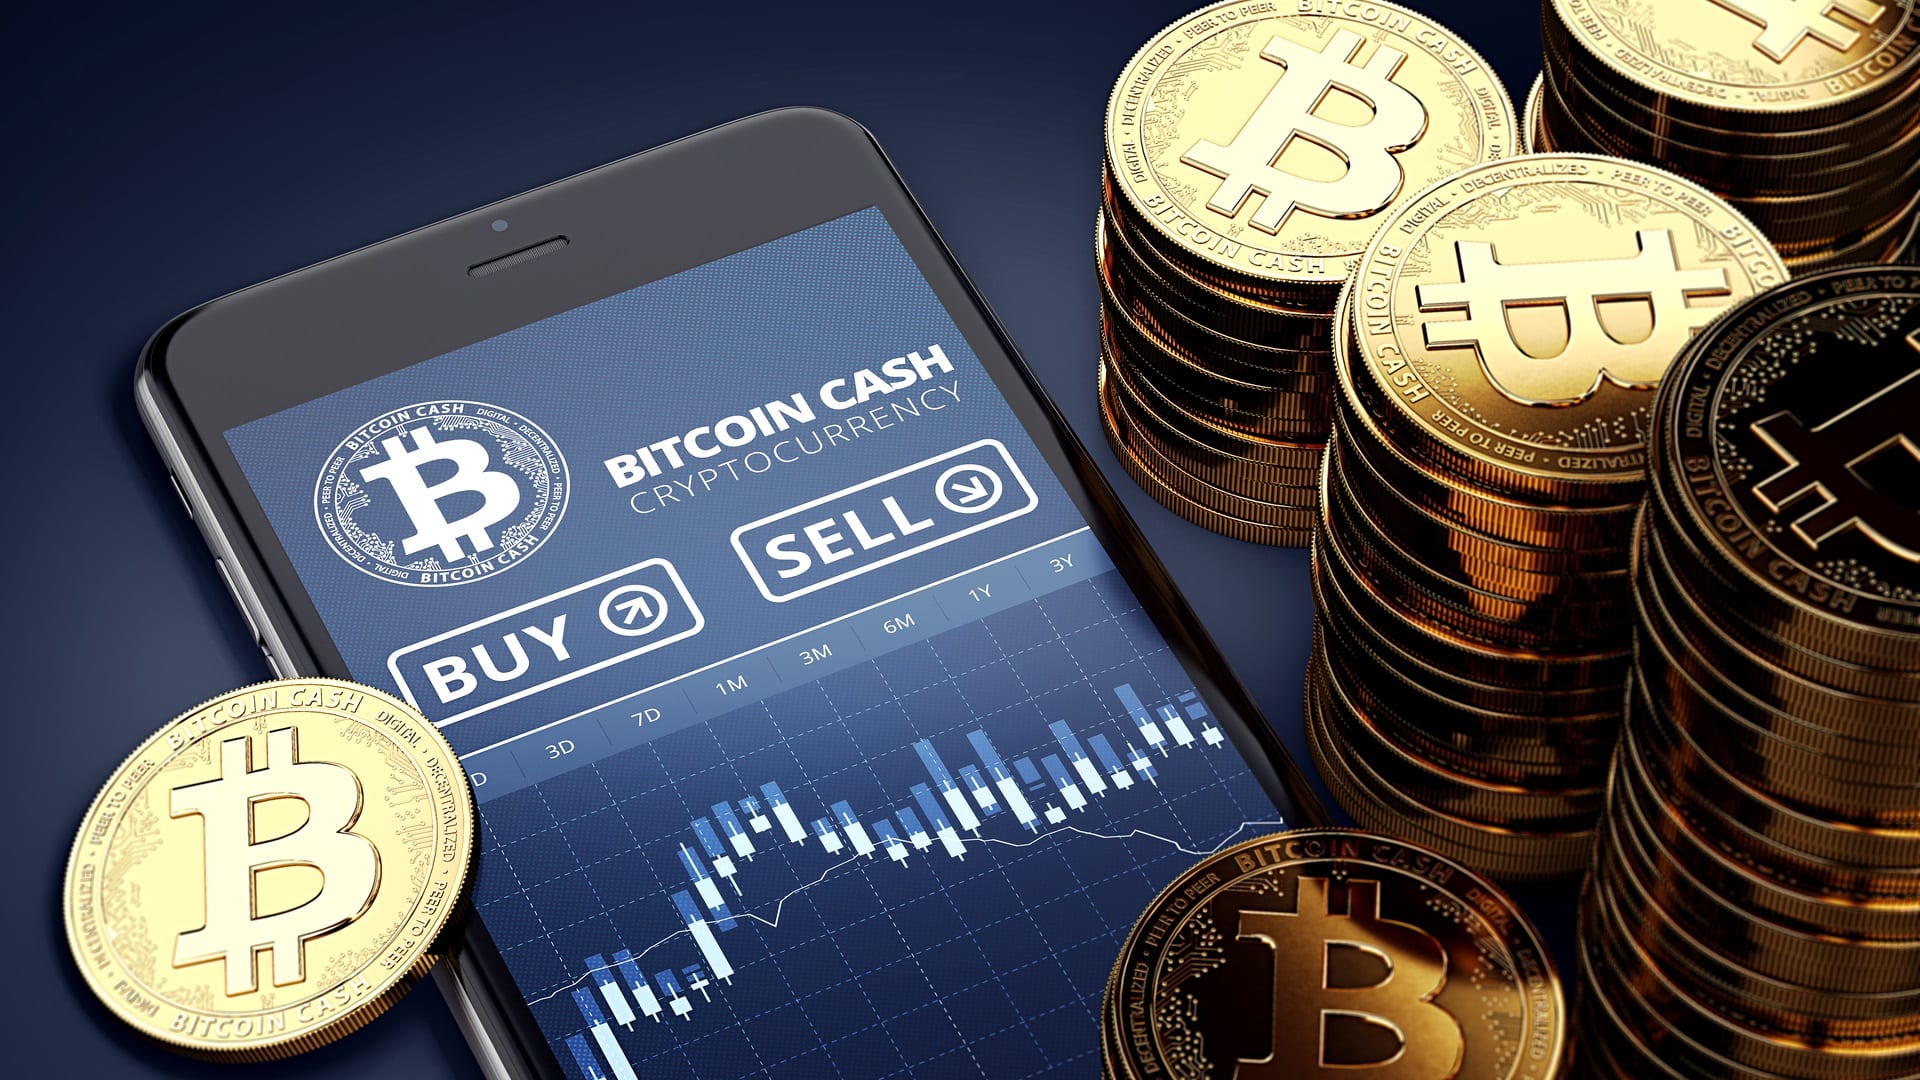 Bitcoin Cash Price Prediction: Is BCH a Buy or Sell in May?